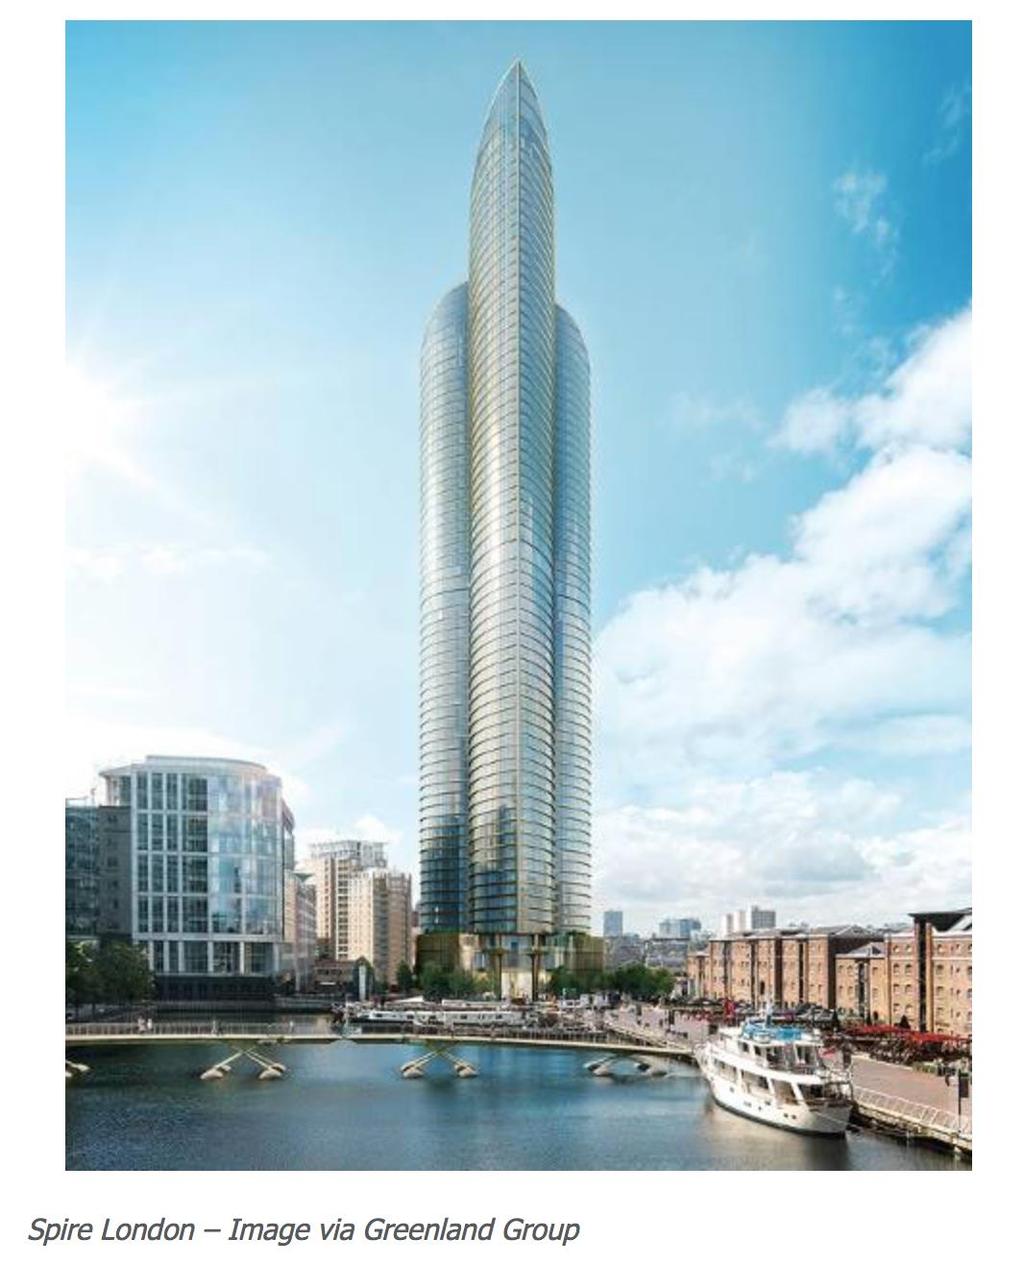 The concerns over a series of proposed high-rises and single exit stairs 7 high-rise residential towers in development in London with